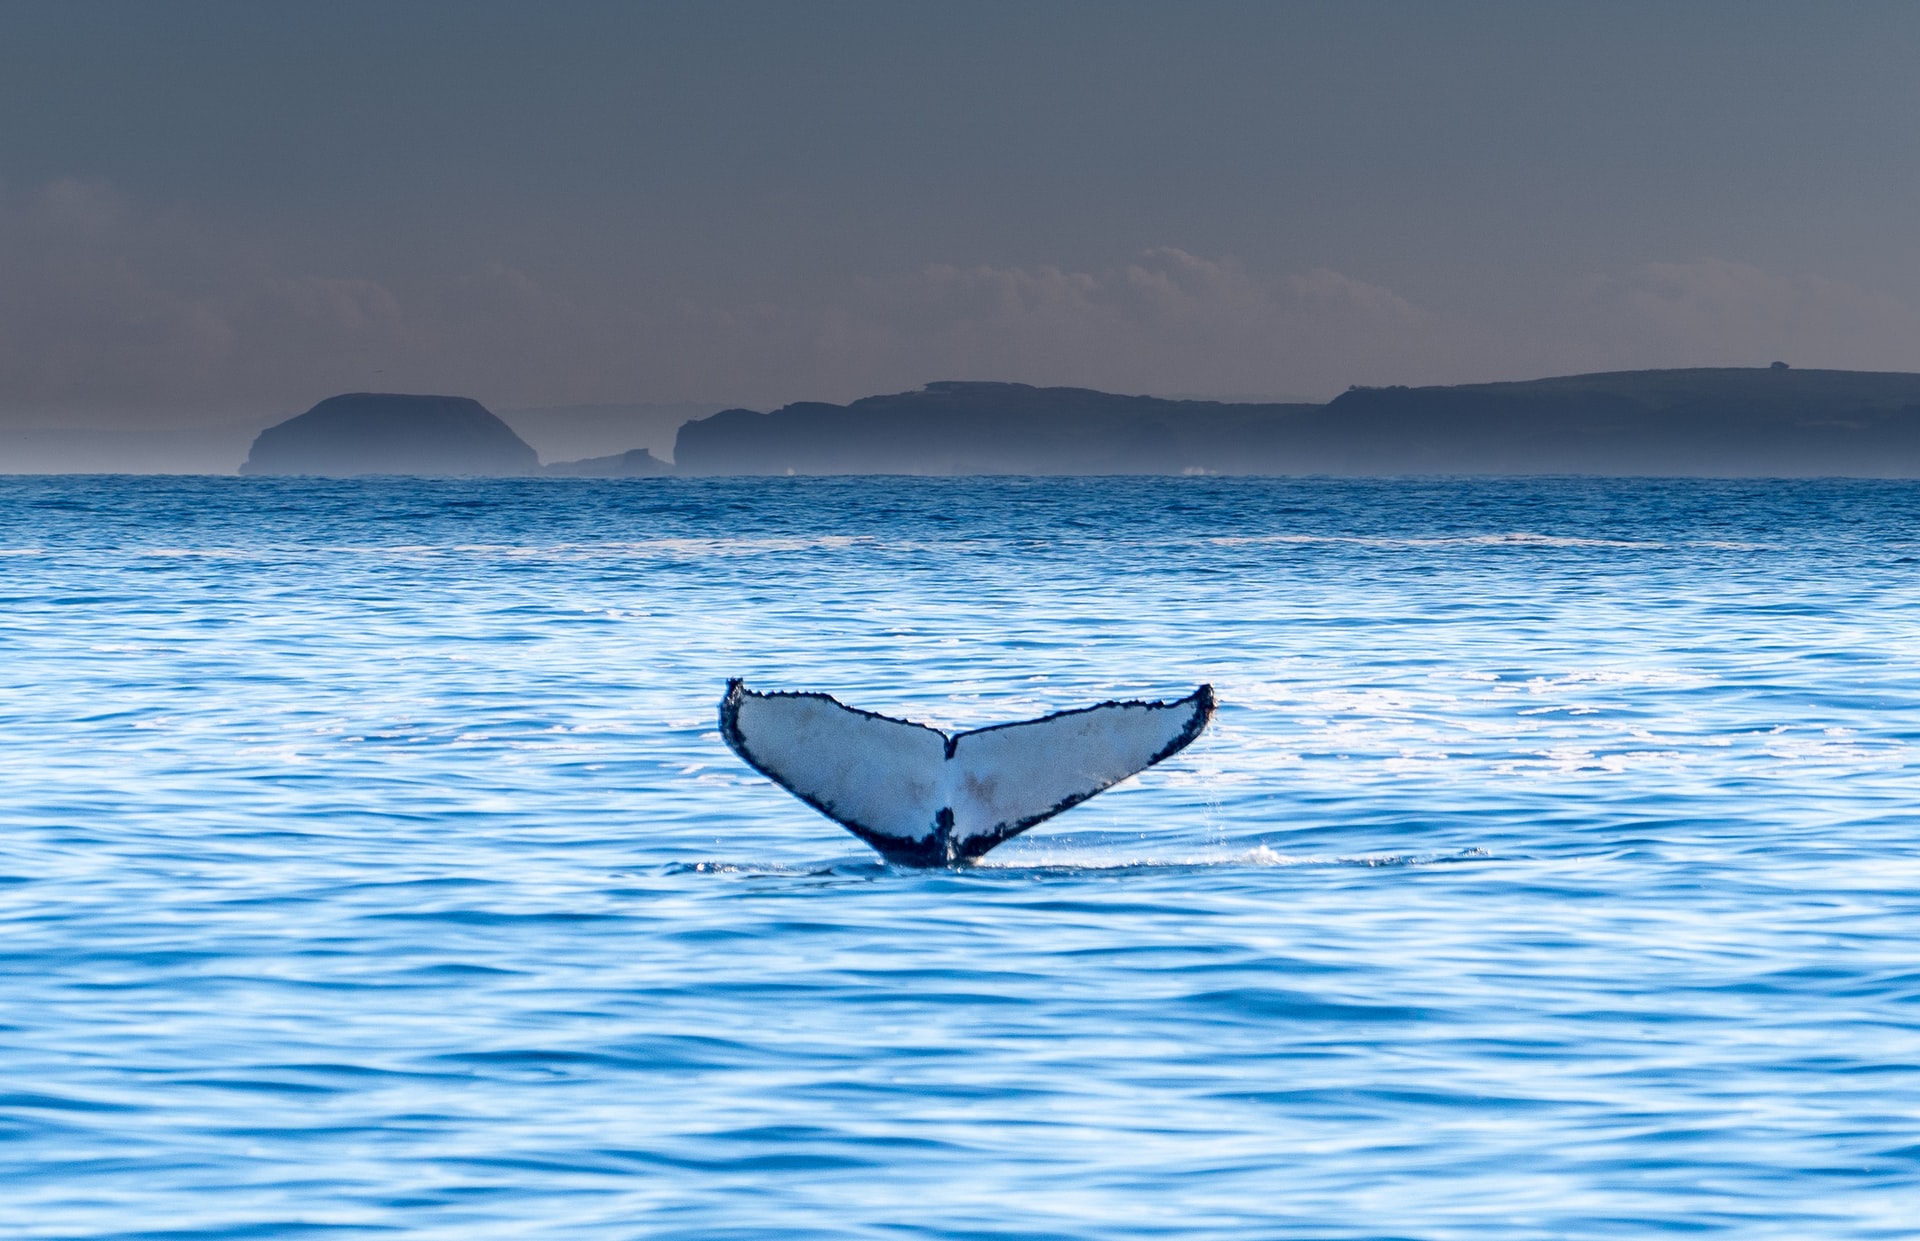 As more whales are killed, the ocean’s food distribution becomes destabilised and causes changes in the food supply of many other kinds of marine life. For example, a blue whale can consume as much as 40 million krill per day, so you can imagine its impact on stabilising the aquatic ecosystem if the blue whale species were to become extinct.